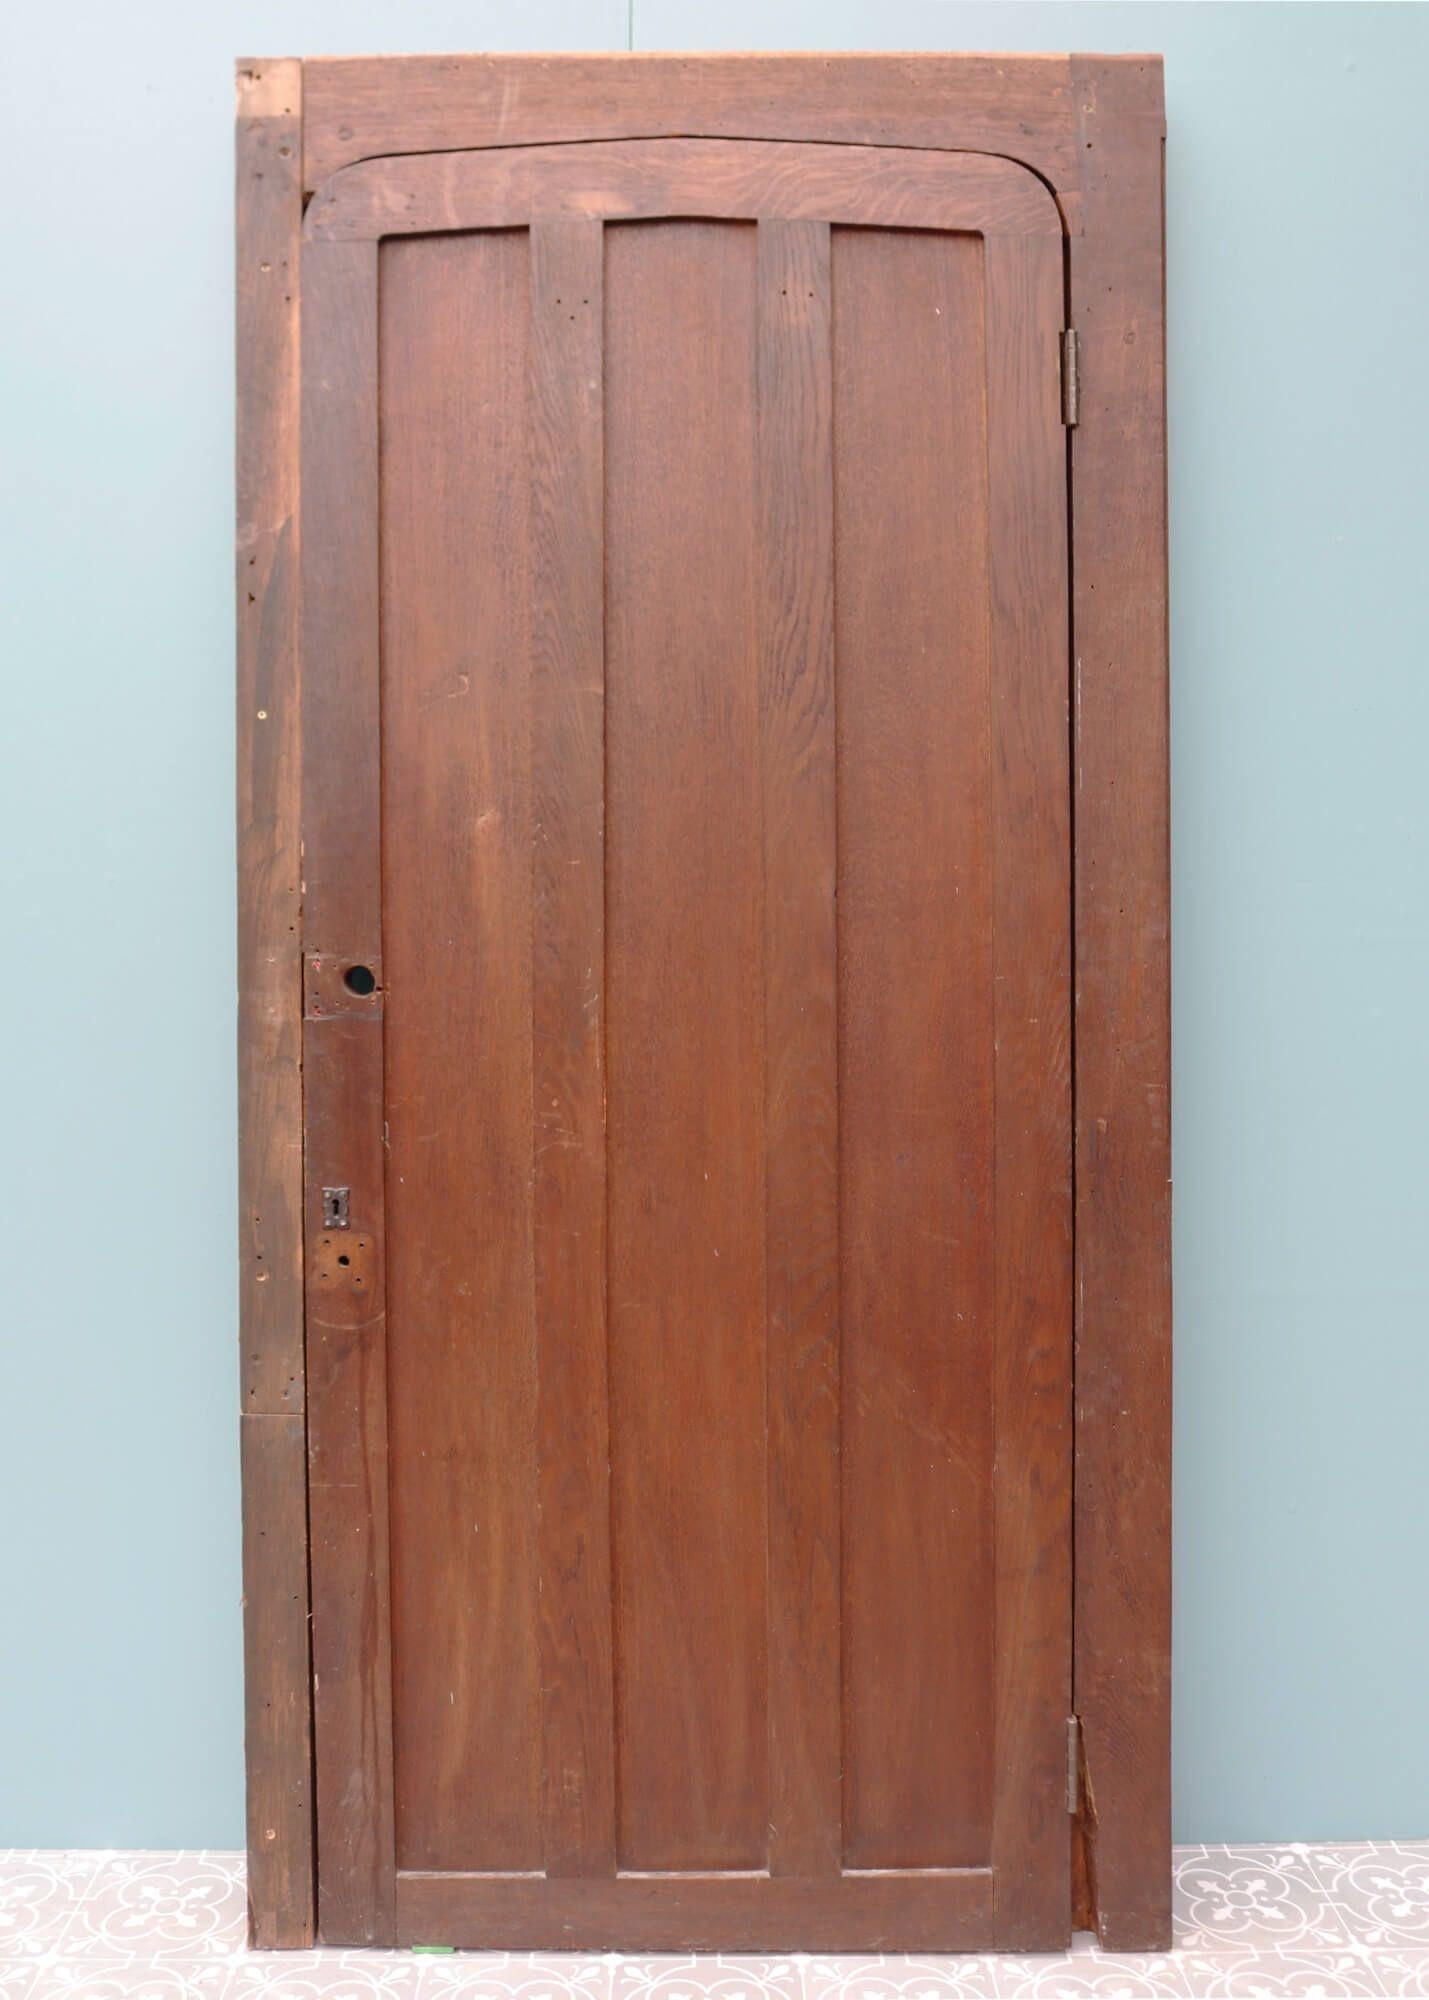 This Edwardian oak door with frame is one of two doors sourced from Rochester Cathedral, the second oldest Cathedral in England. It features a shallow arched door with three shaped, vertical panels within a matching oak frame, once used as an